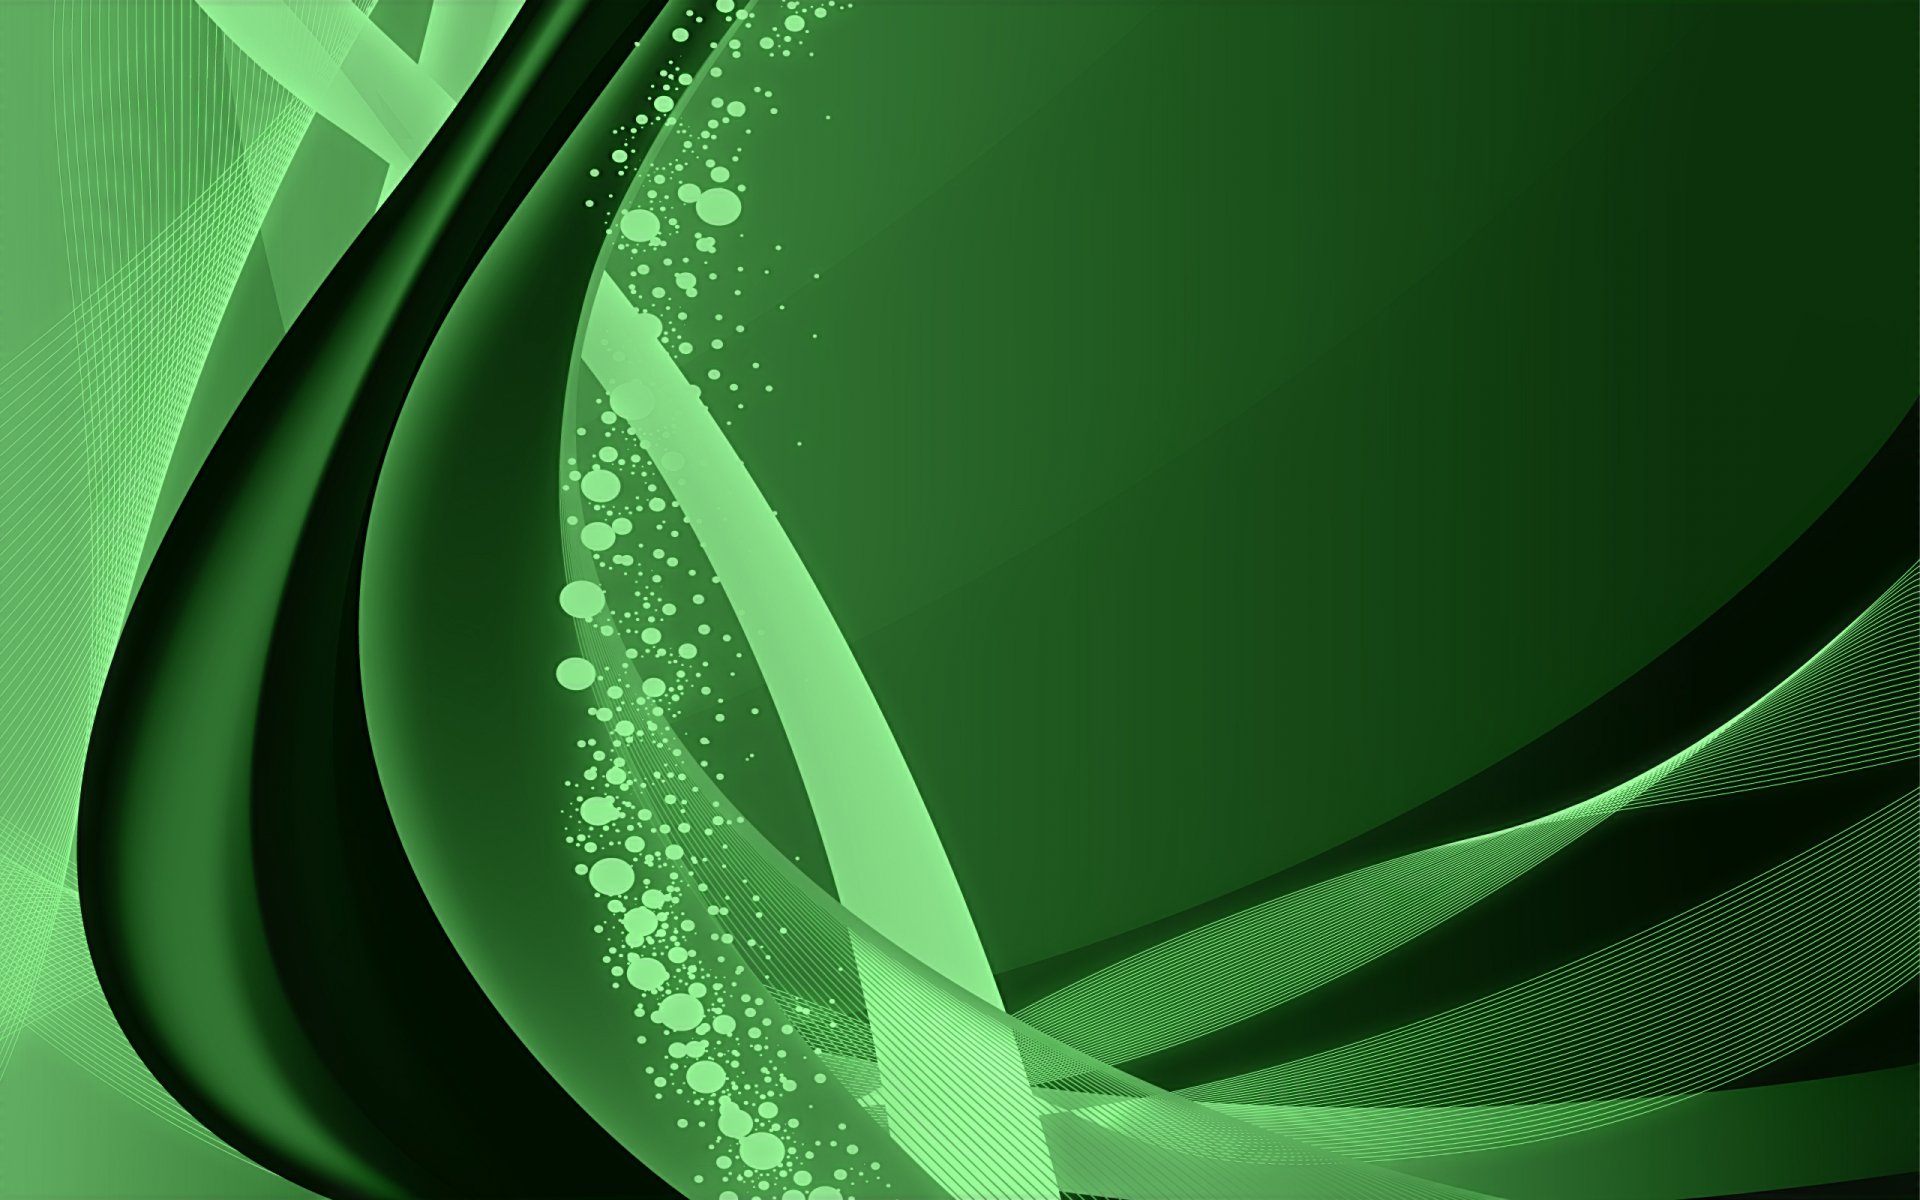 Abstract Green Hd Wallpaper Background Image 2560x1600